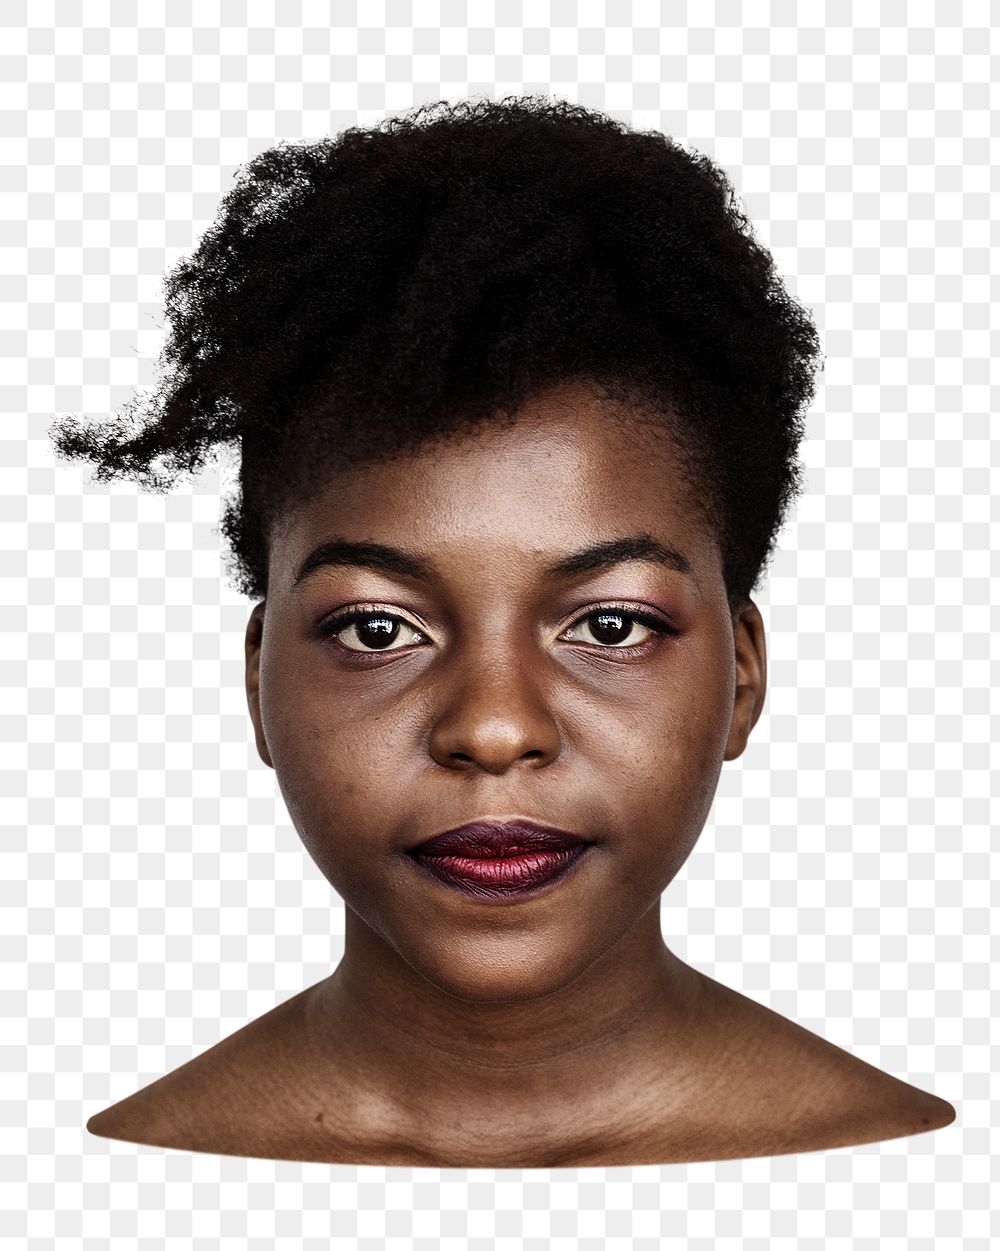 African woman png element, transparent background